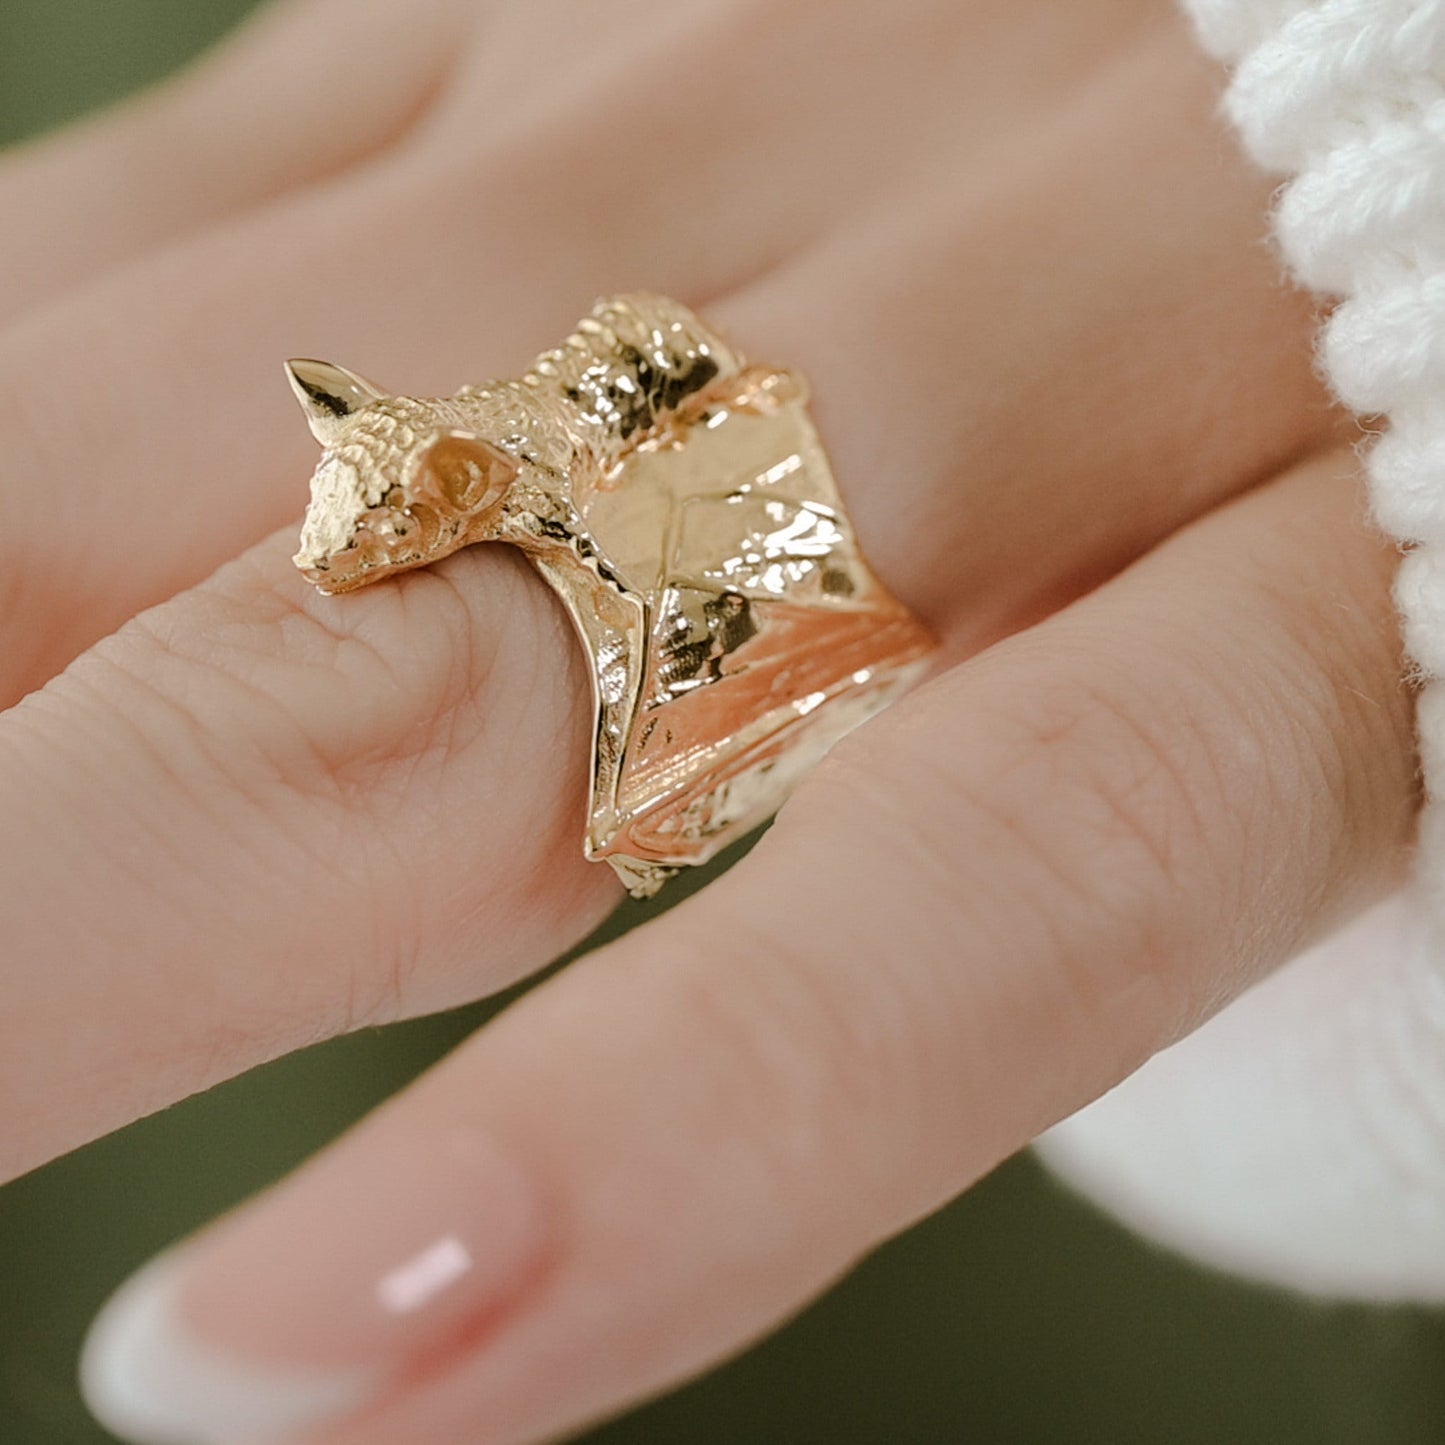 Bat Ring in Solid 14K Gold, inspired by the Bat Colony in Austin, Texas